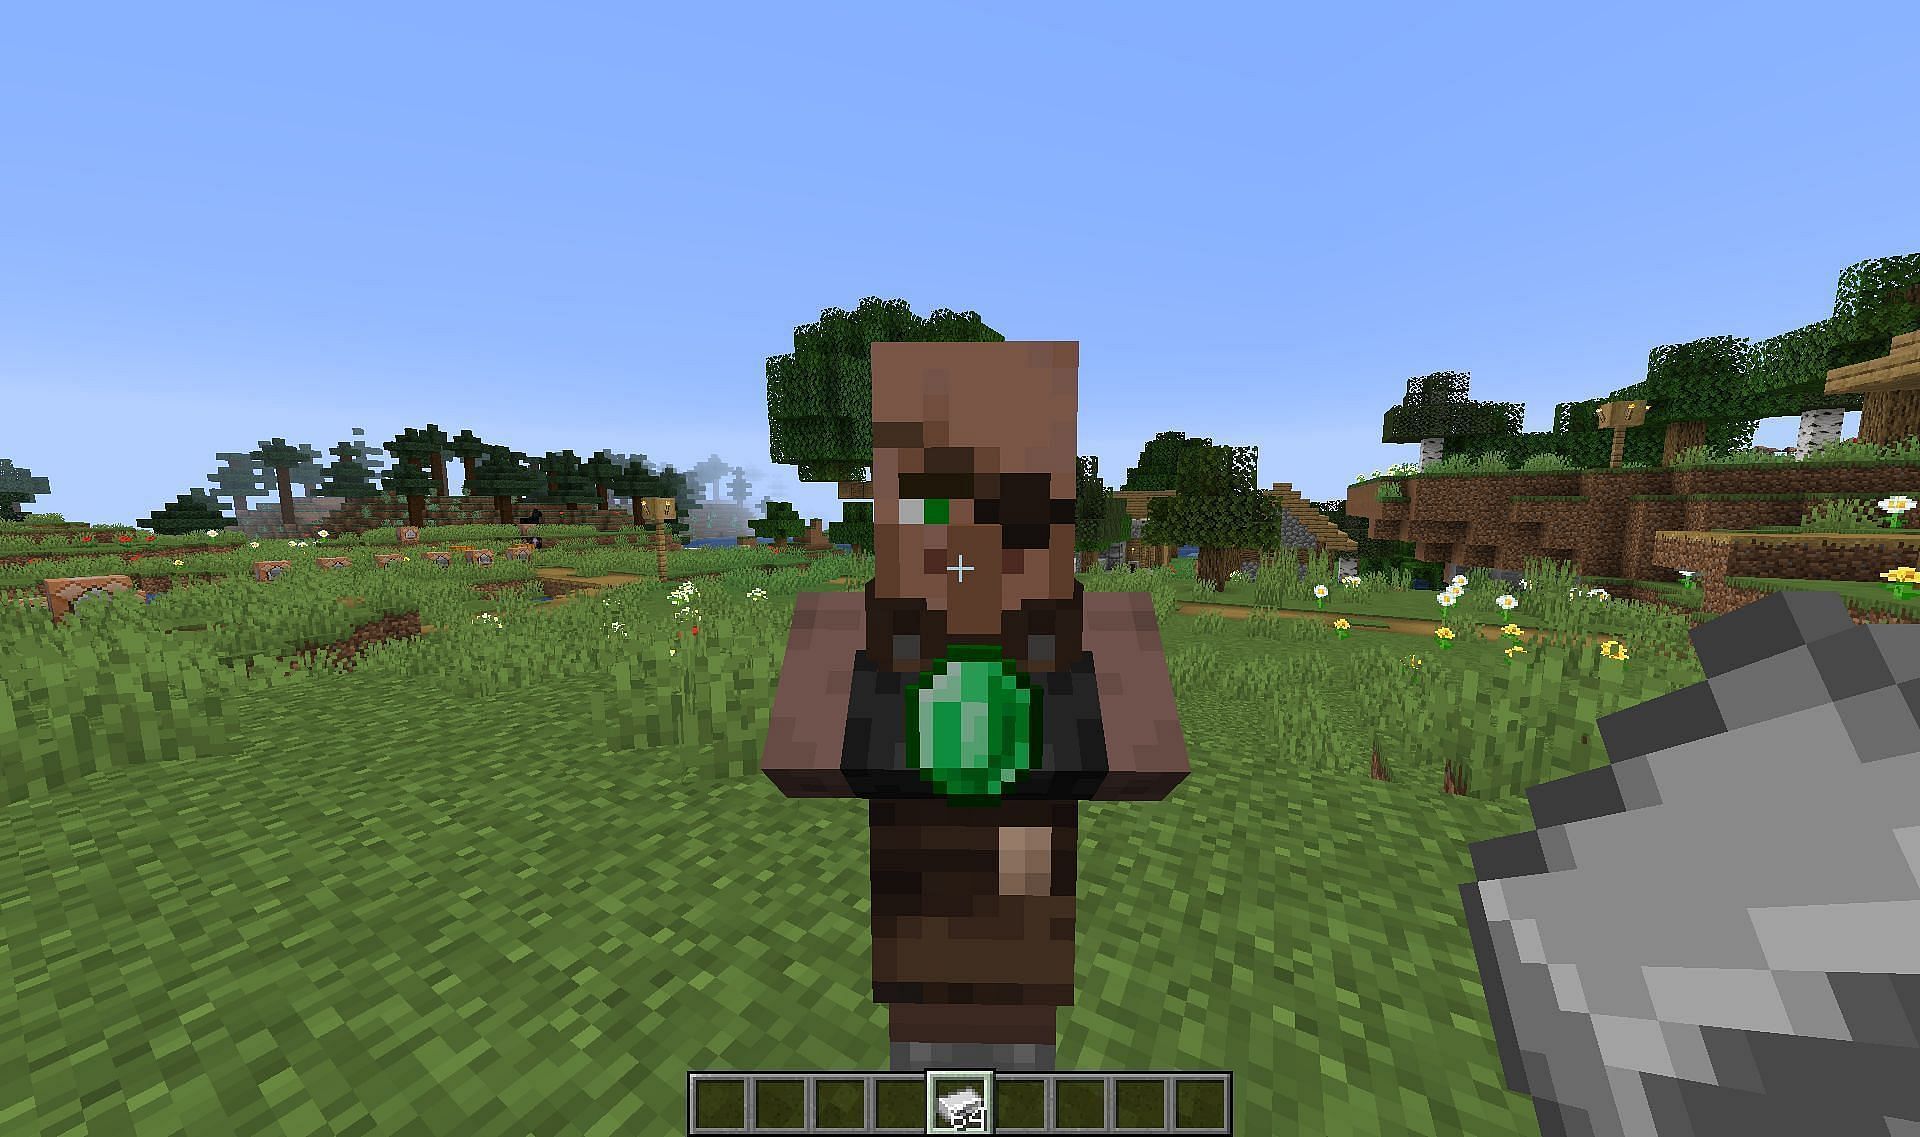 Trading with villagers (Image via Minecraft)